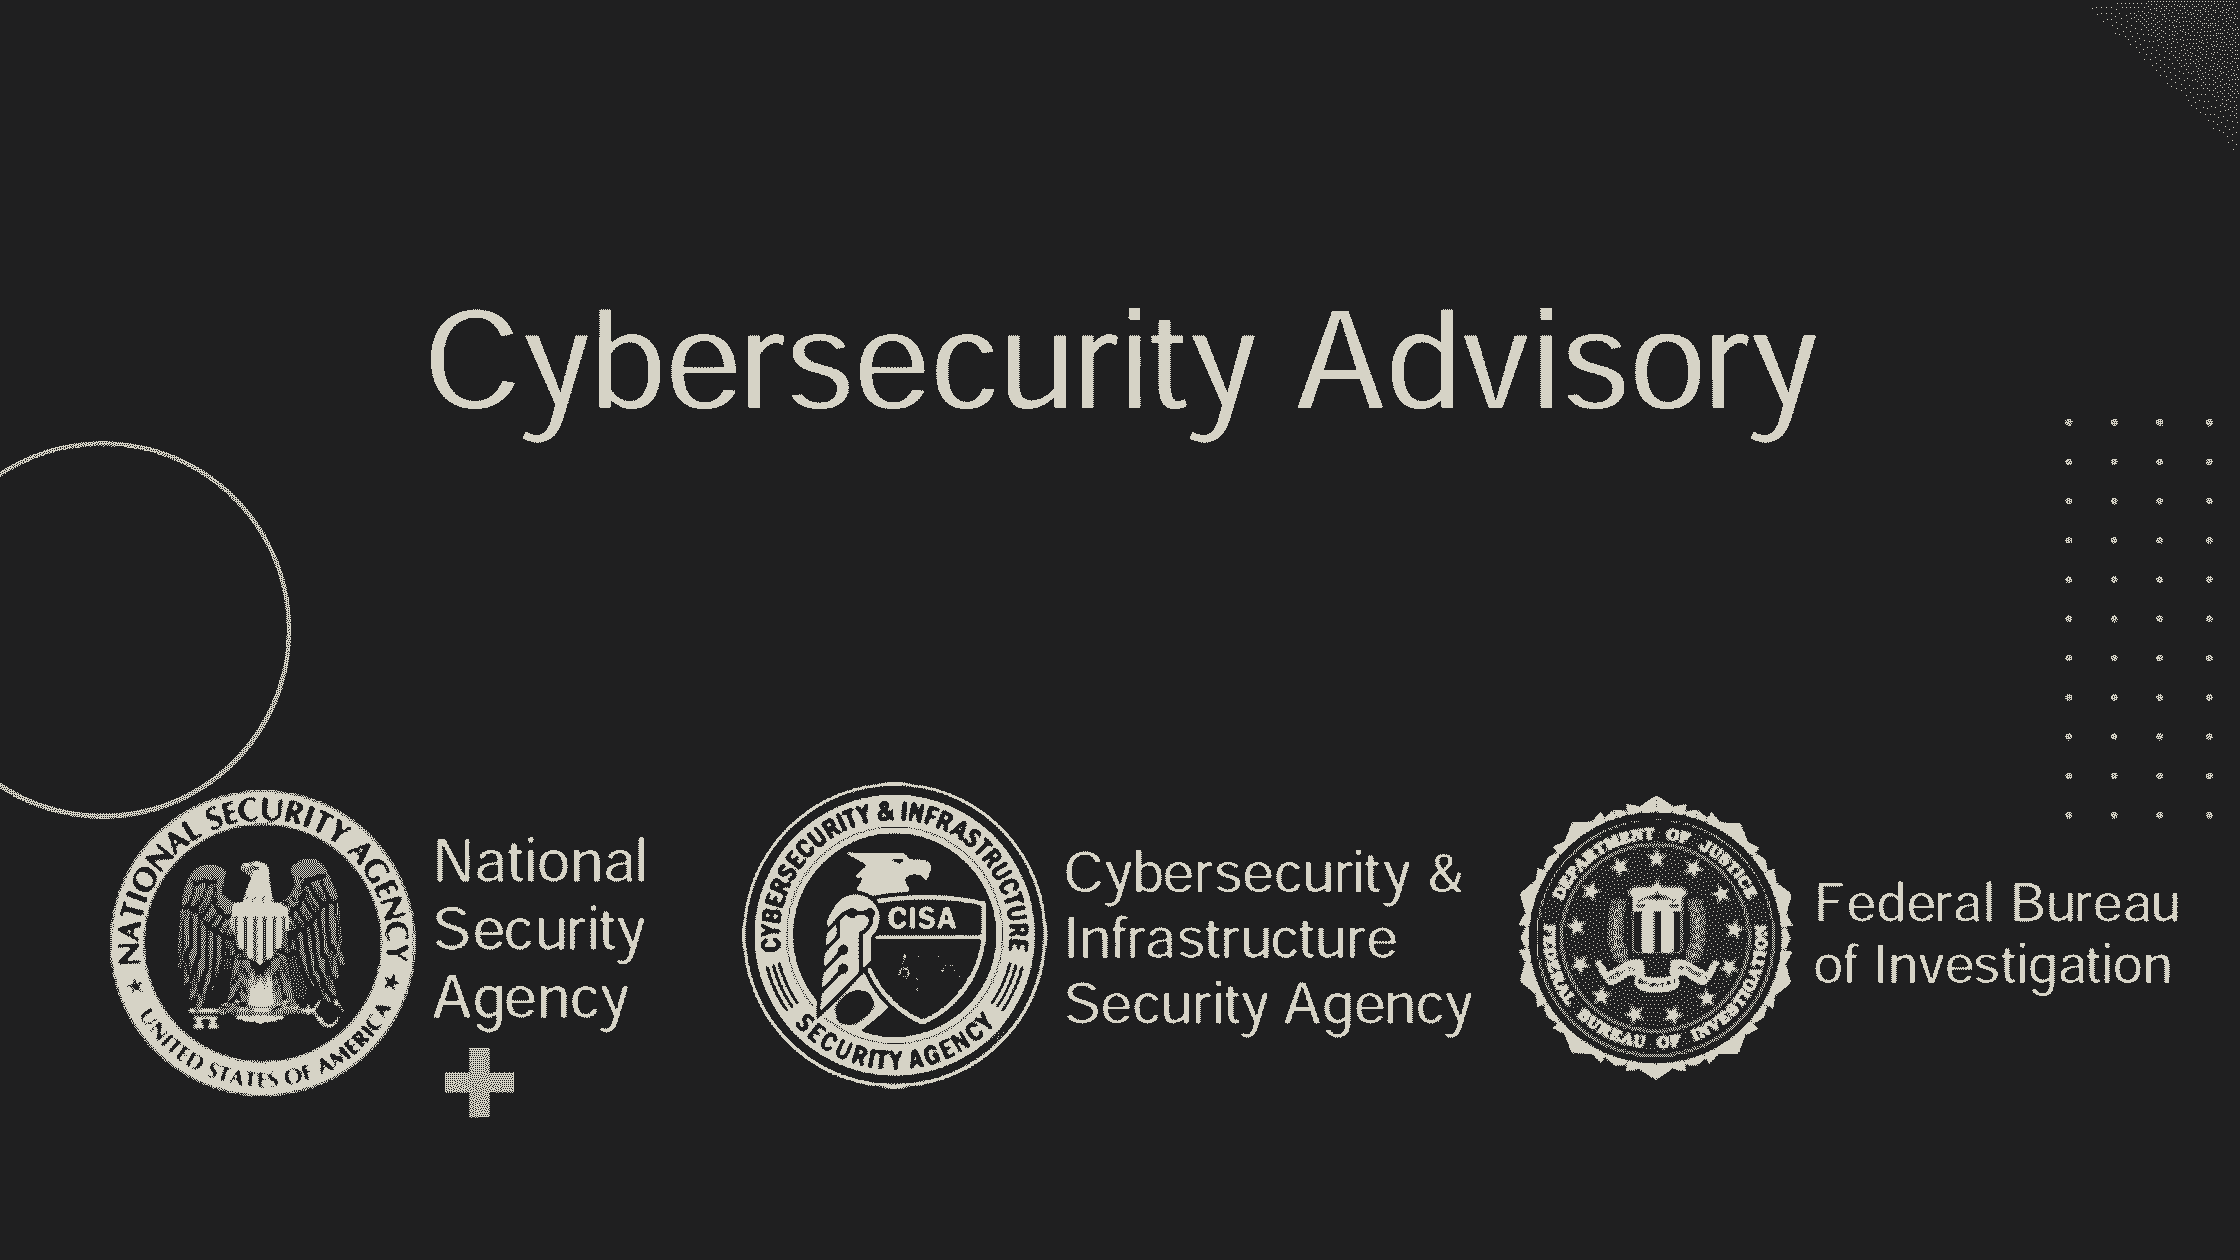 US Agencies Issue Advisory: Network Devices Compromised by Hackers